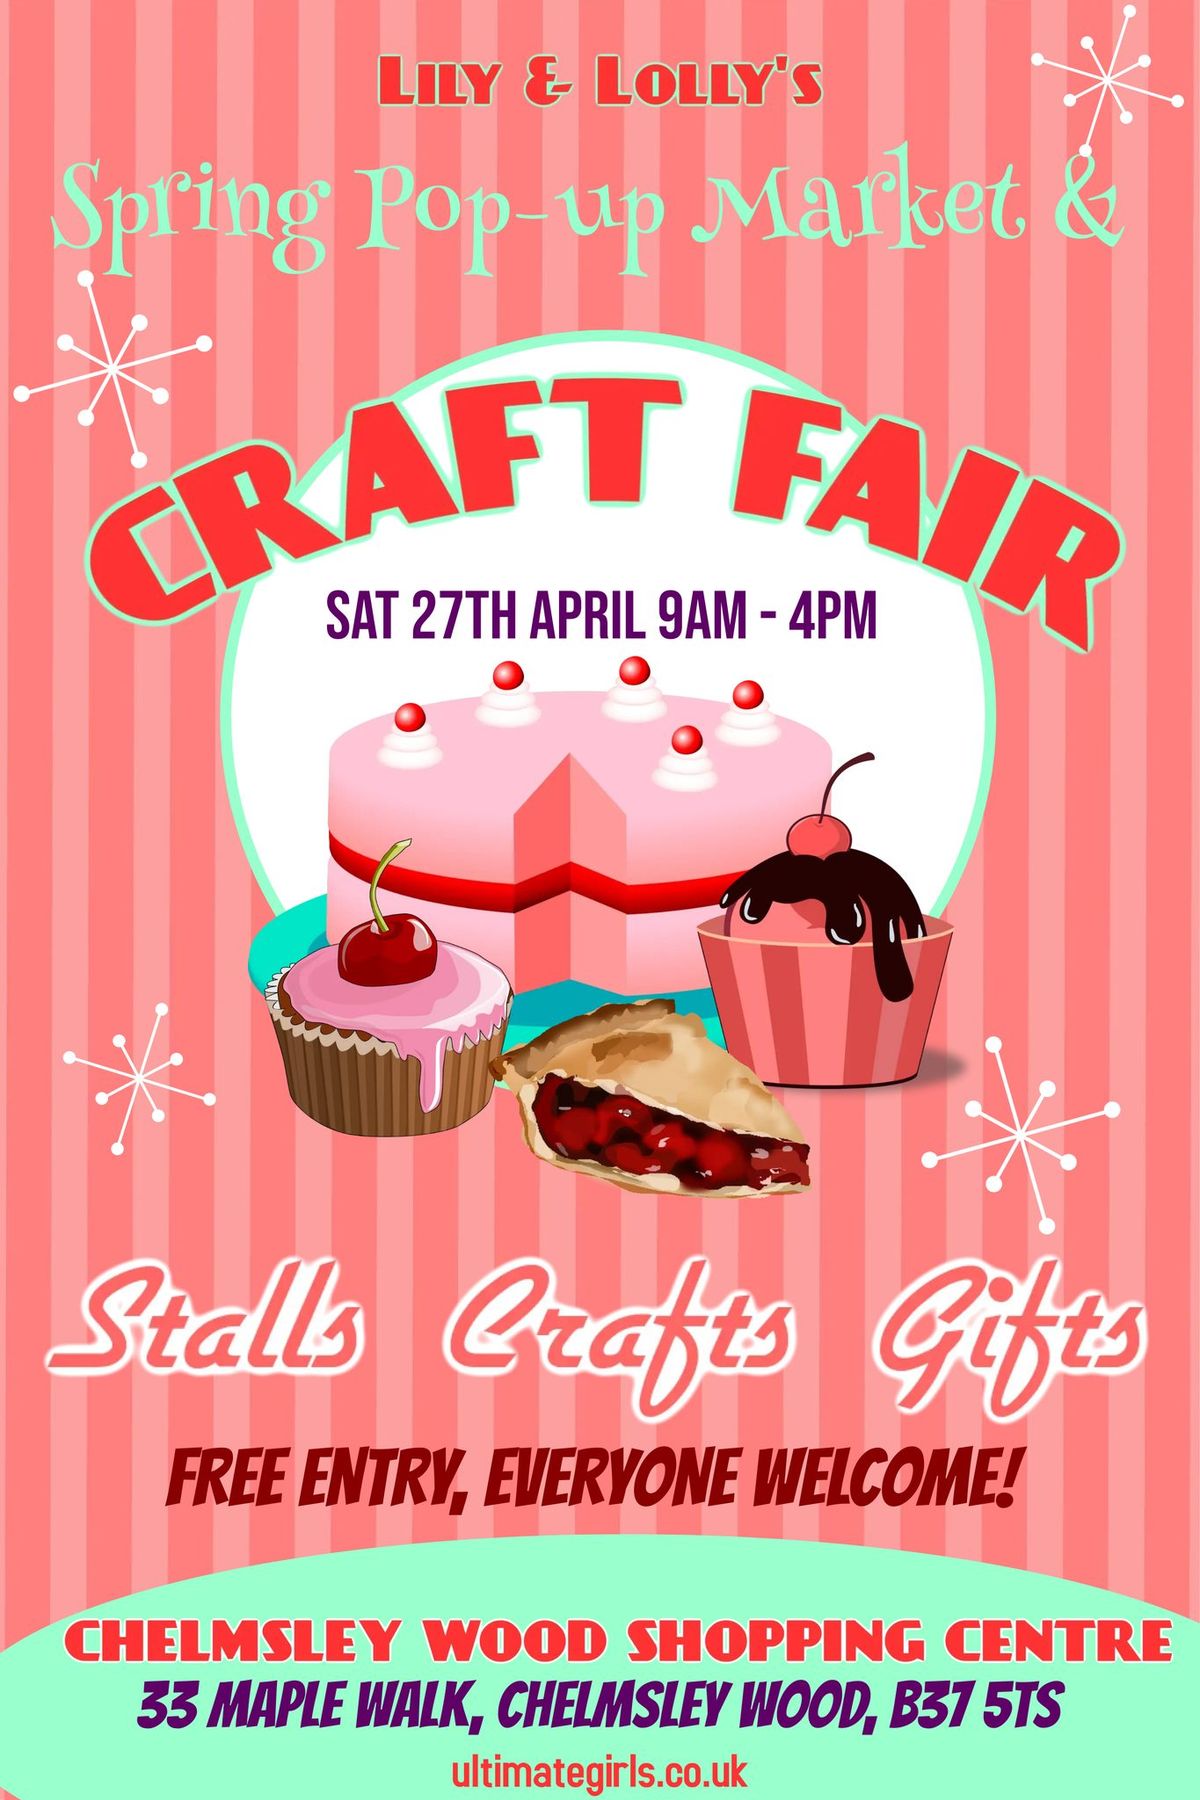 Lily & Lolly's Spring Craft, Gift & Vintage Market at Chelmsley Wood Shopping Centre, free entry!